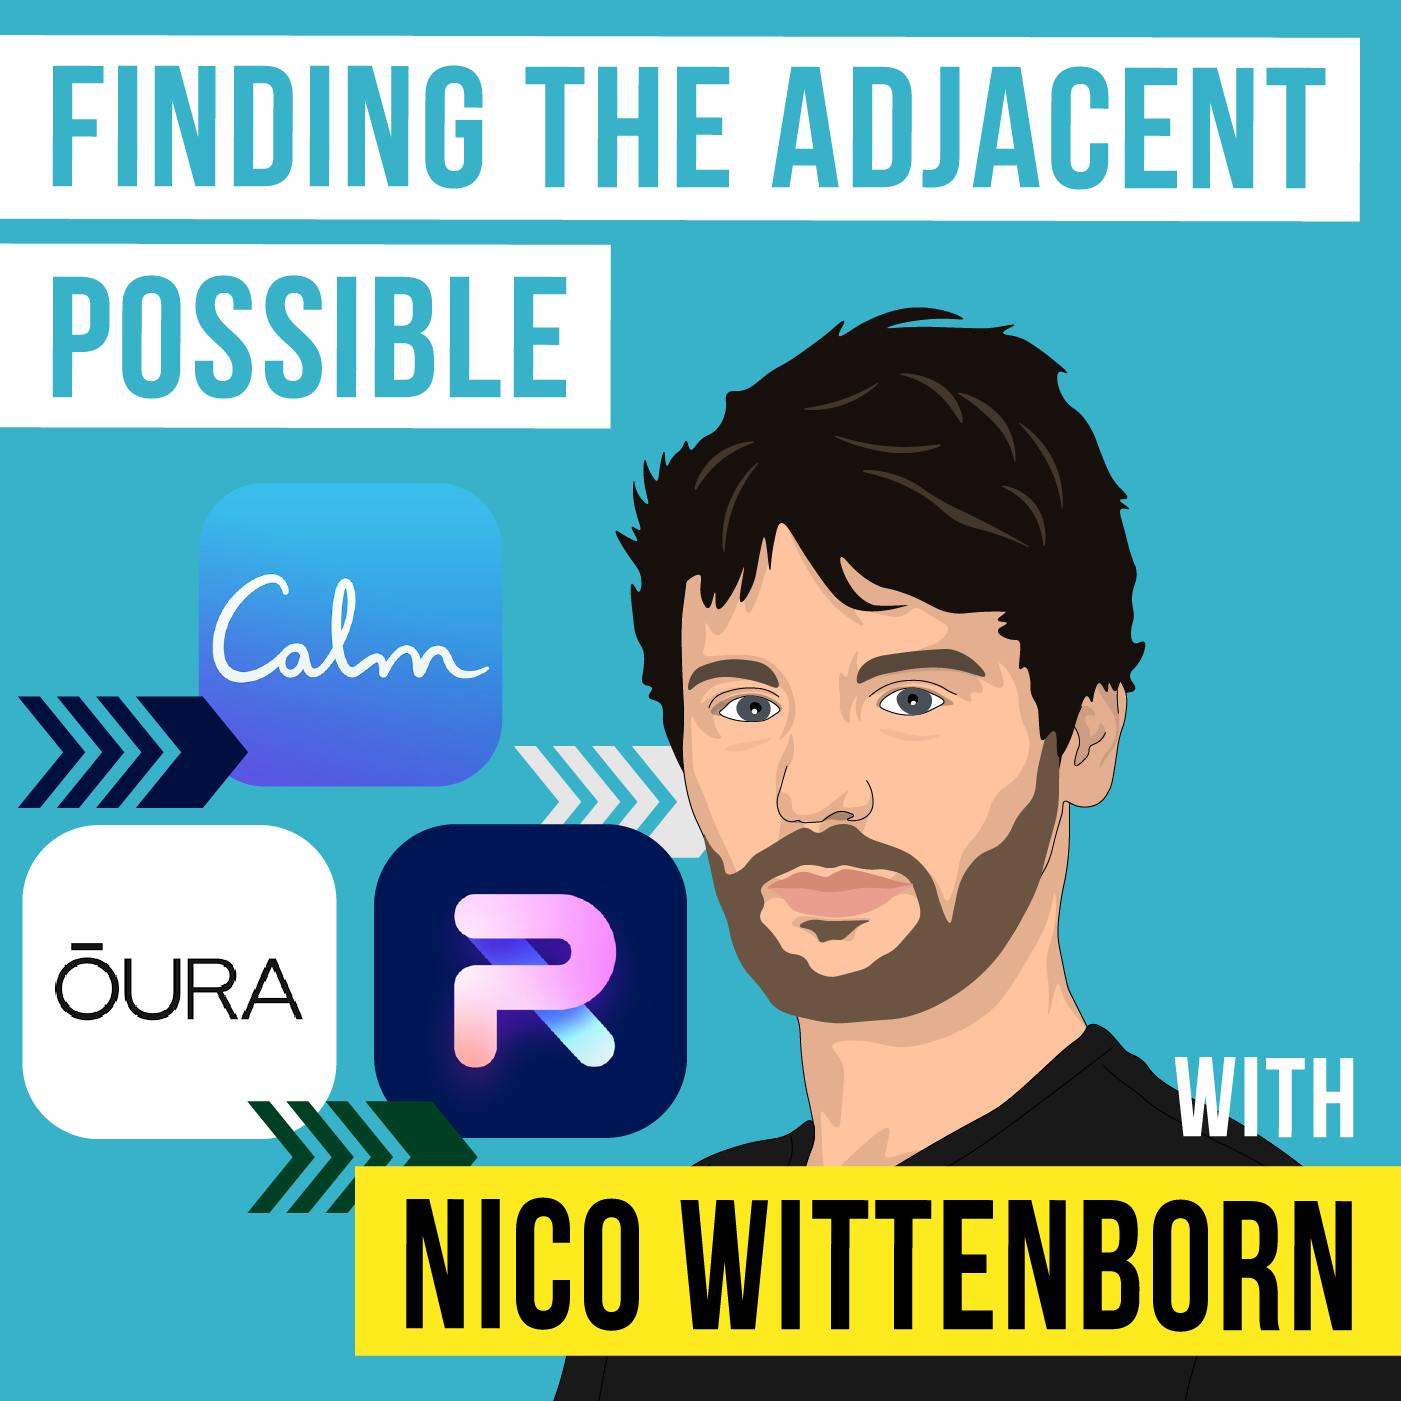 Nico Wittenborn - Finding the Adjacent Possible - [Invest Like the Best, EP.372]